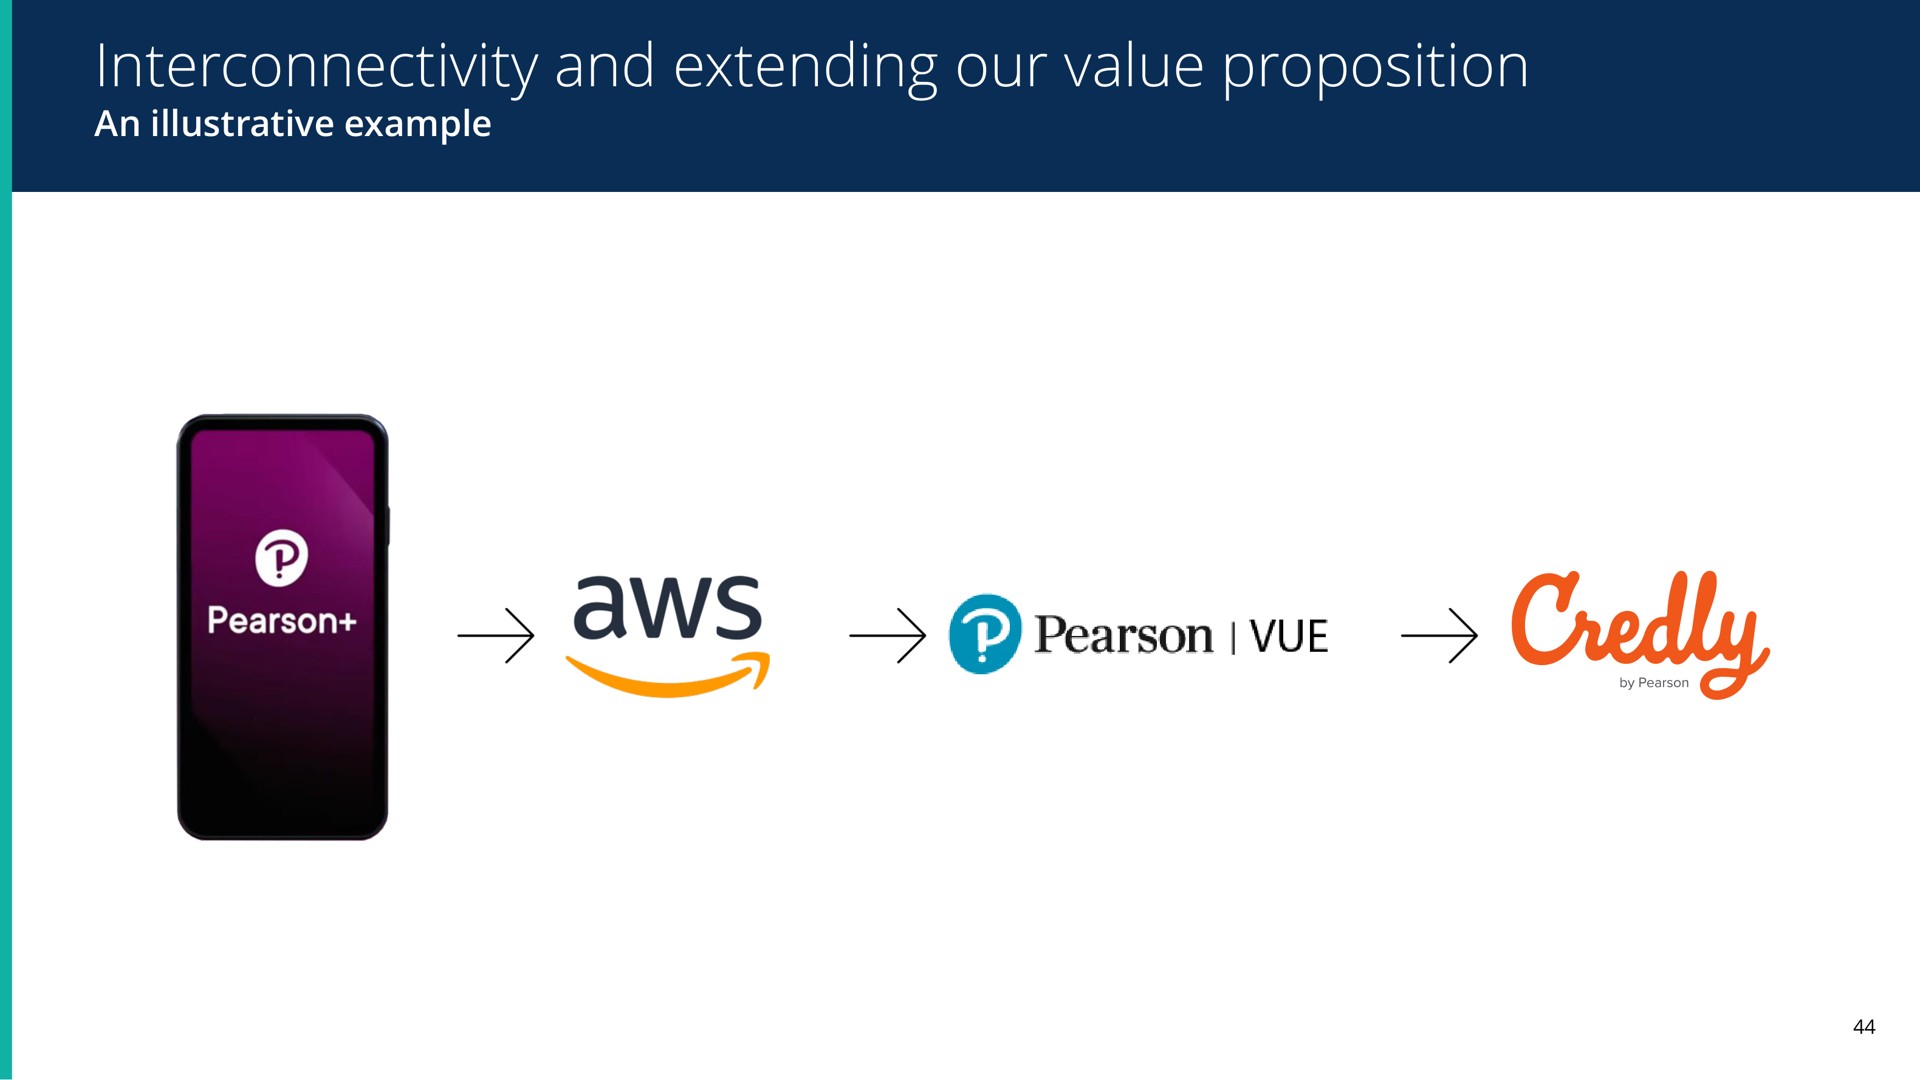 and extending our value proposition | Pearson